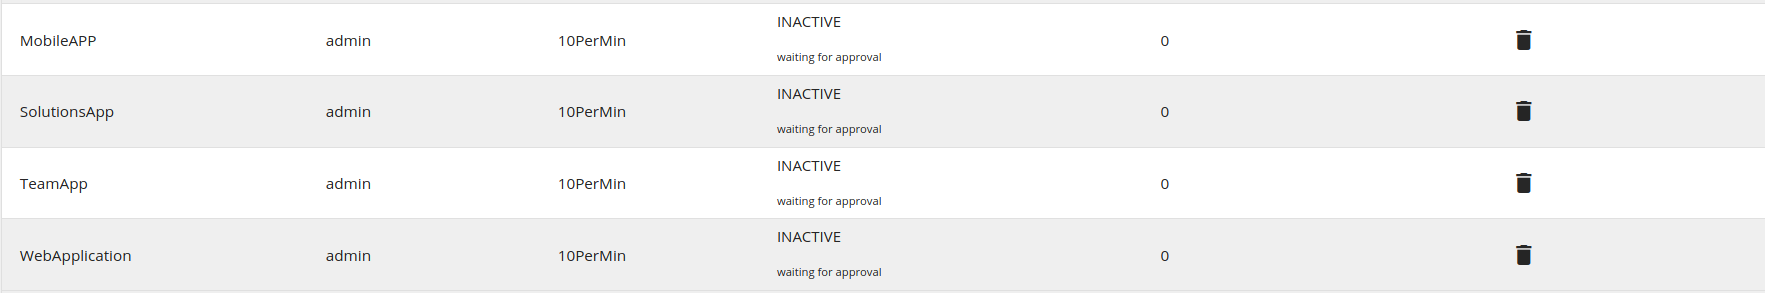 Application status is INACTIVE - Waiting for approval